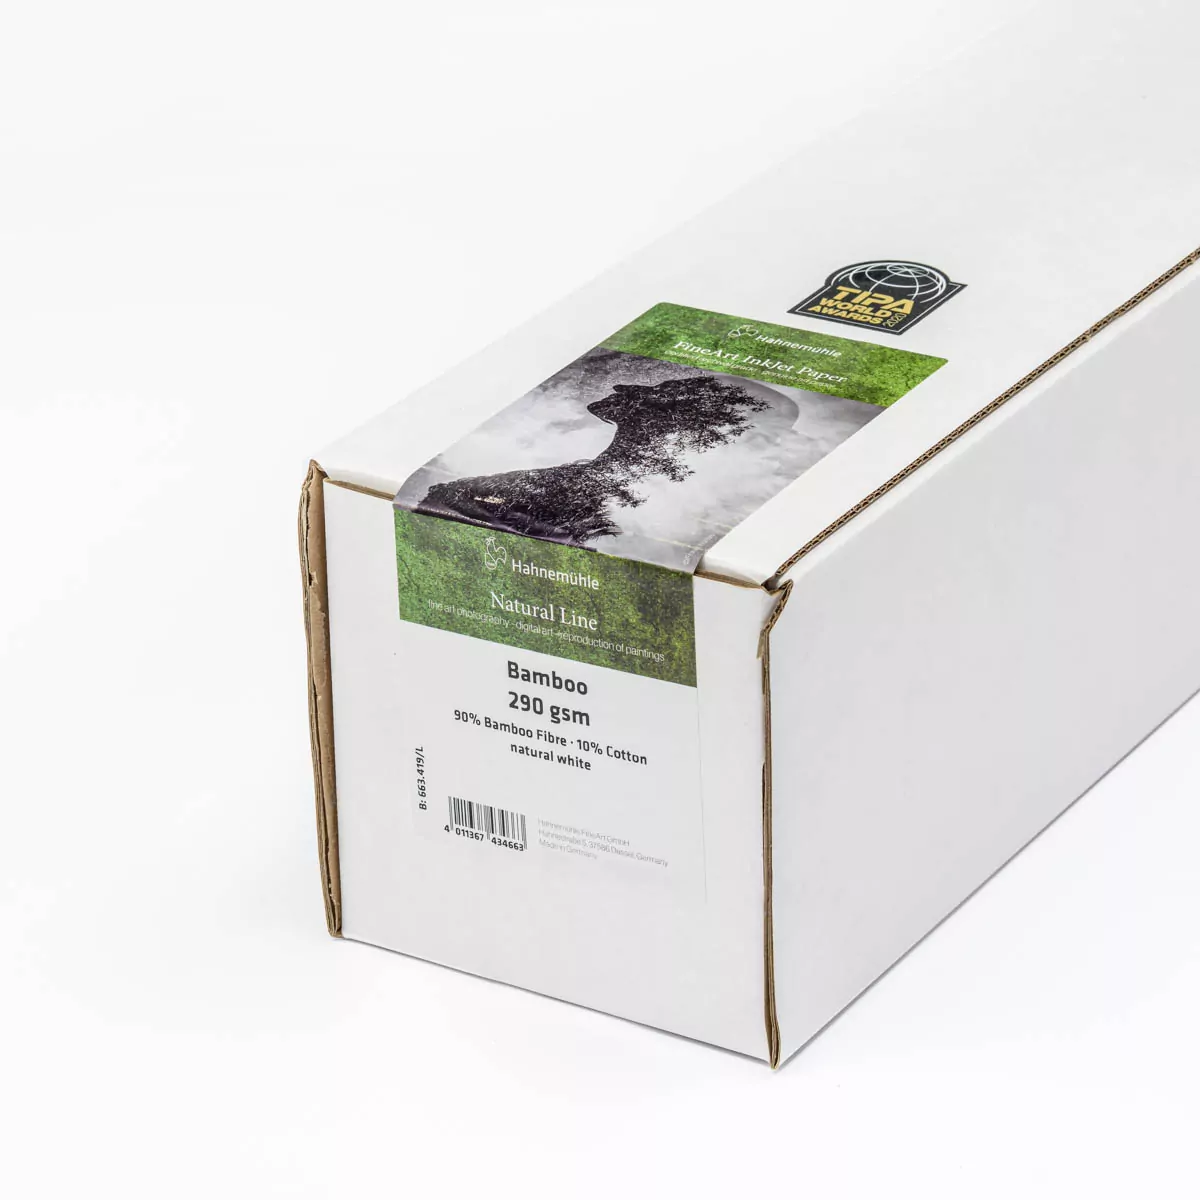 Hahnemuhle Bamboo 290gsm 44"(111cm)x12m roll